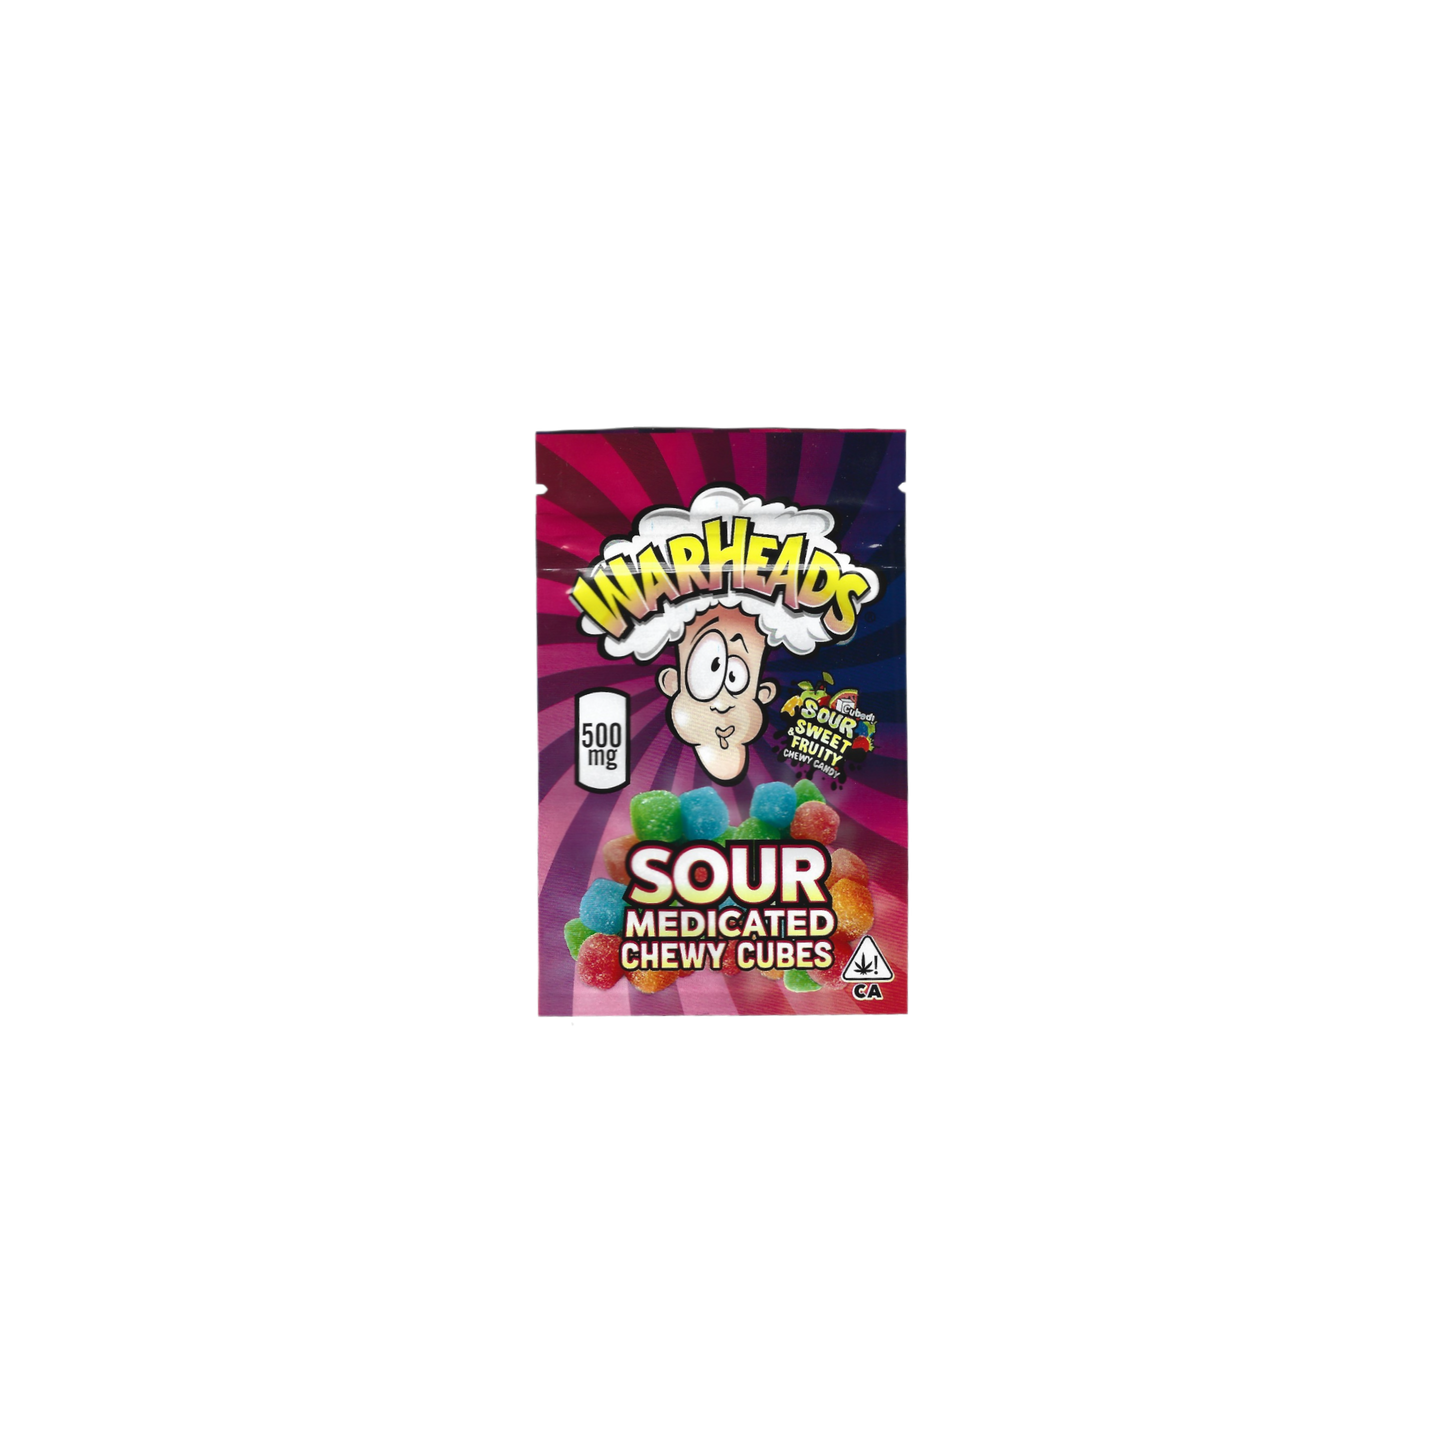 10x Warheads Sour medicated Chewy cubes sour sweet & fruity Mylar Bag 500mg - Leer